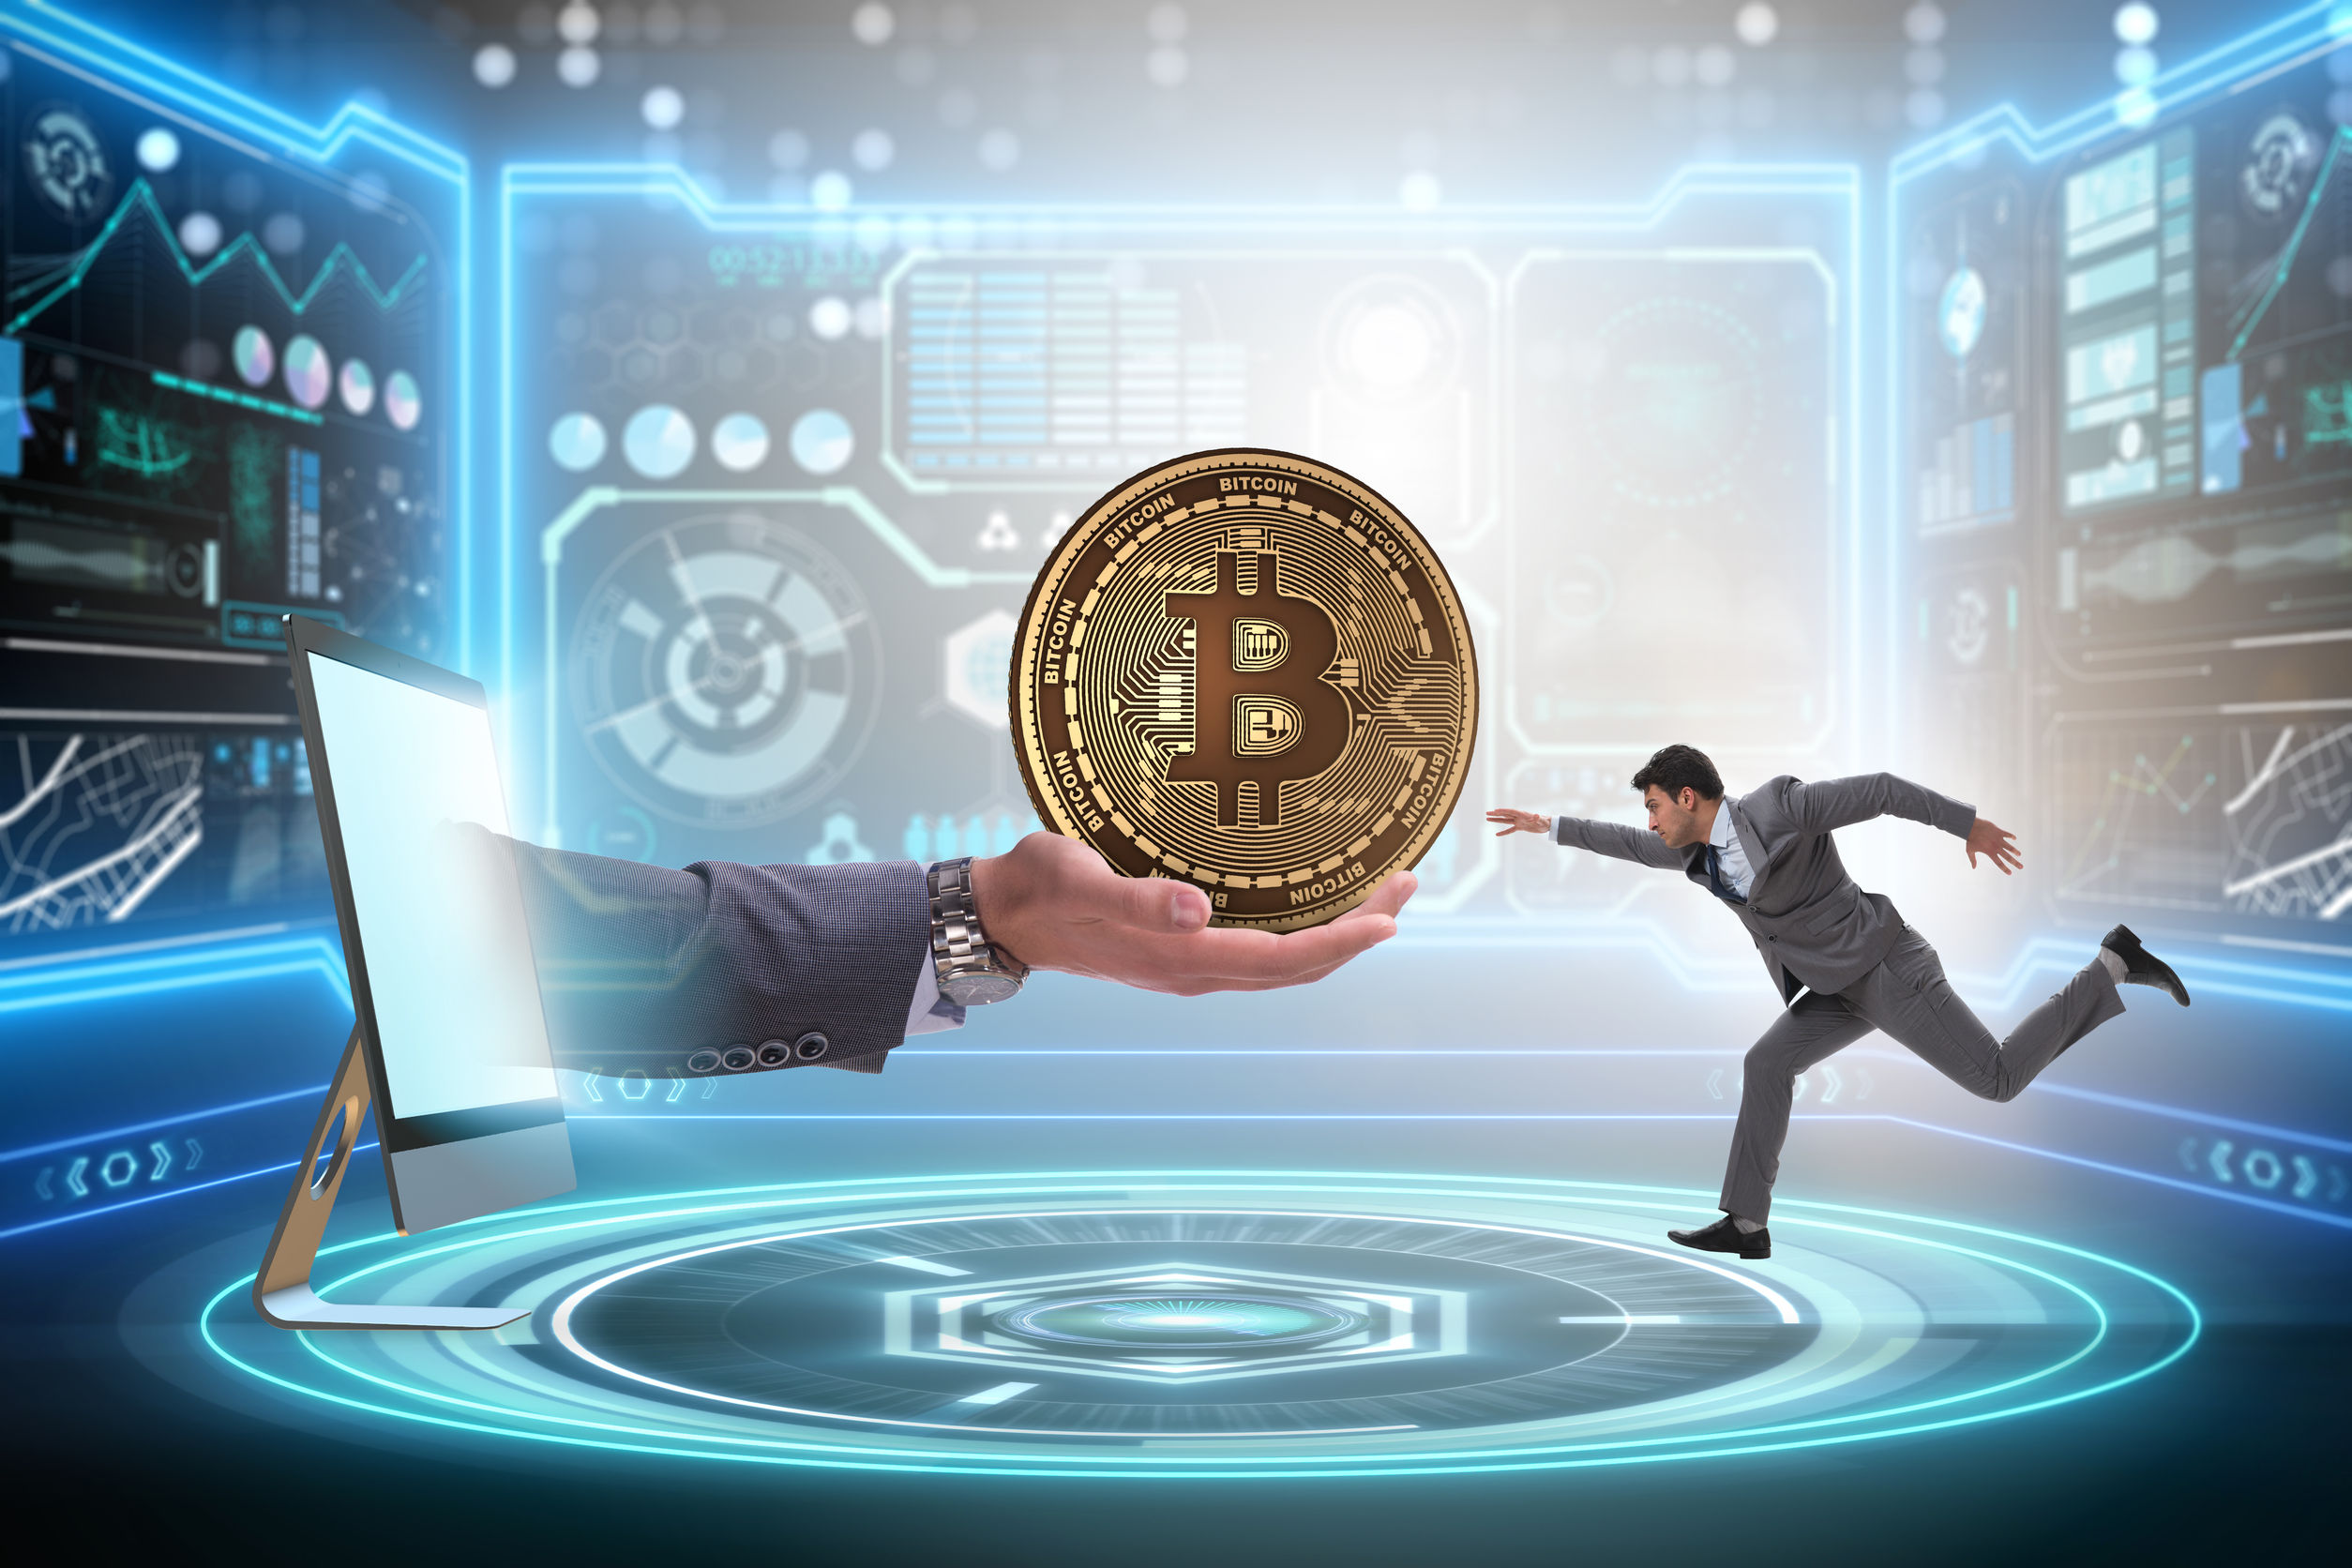 Man running towards a bitcoin being offered by another hand from a computer screen